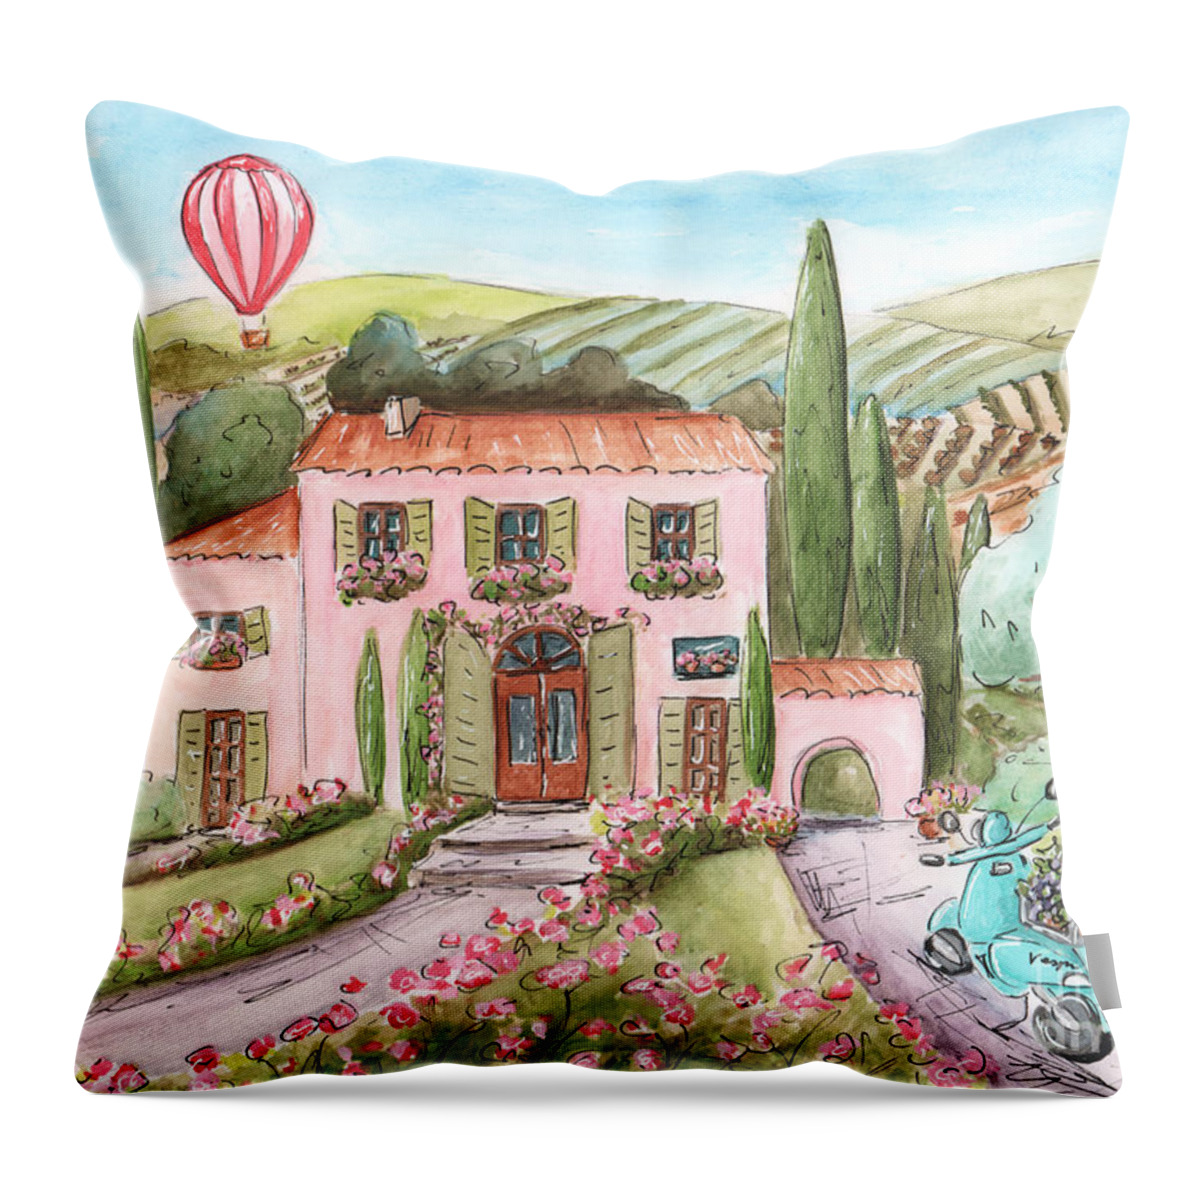 Tuscan Girl's Art Throw Pillow featuring the painting Italian Girl - Tuscan Villa - Vineyards - Hot Air Balloon by Debbie Cerone